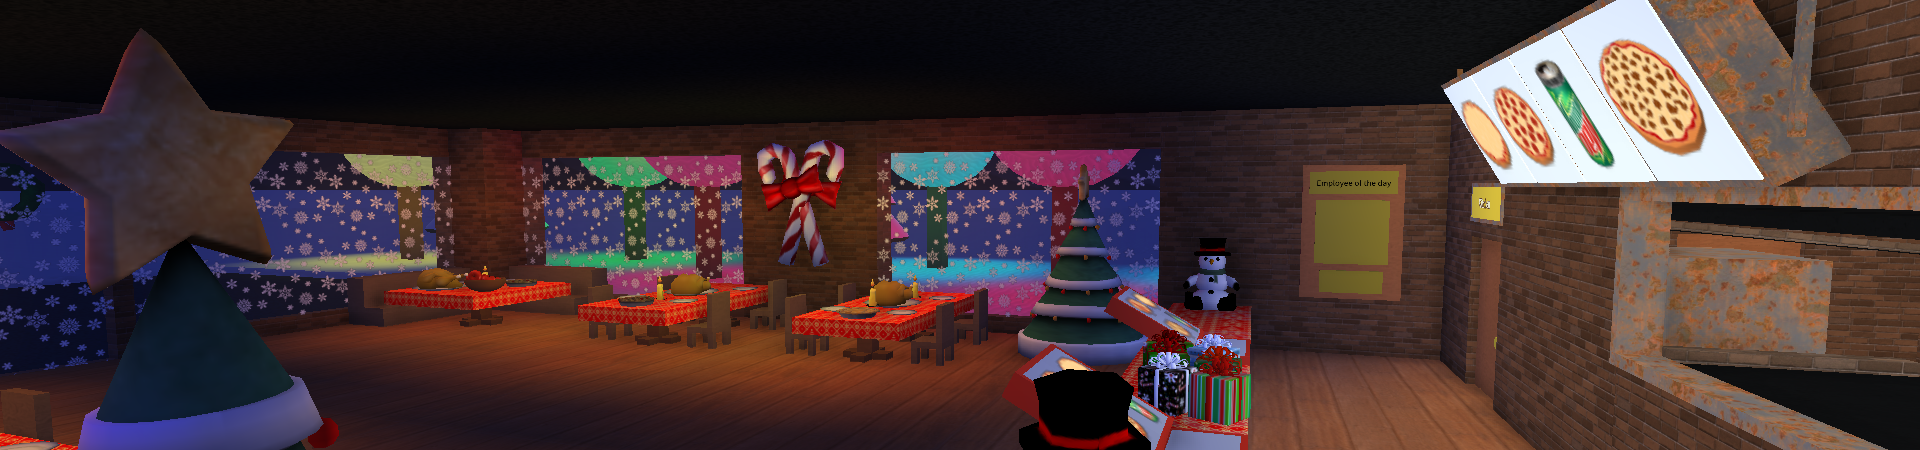 Get Merry With Roblox S Holiday Giftsplosion And Game Events Roblox Blog